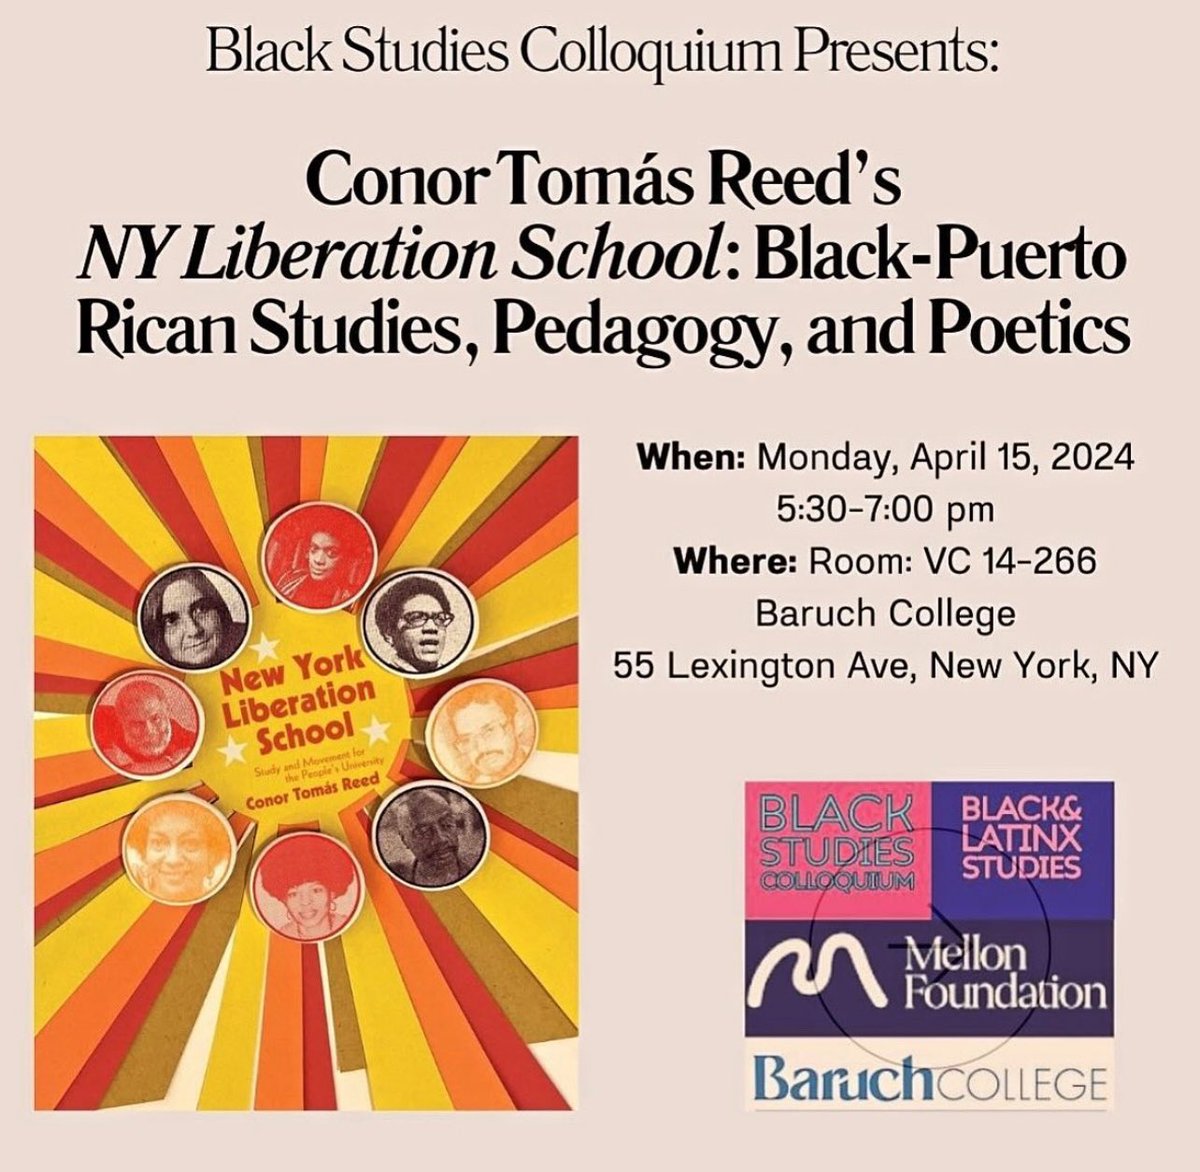 Tomorrow at @BaruchCollege @BaruchBLS ✨

The Black Studies Colloquium presents Conor Tomás Reed's NY Liberation School: Black-Puerto Rican Studies, Pedagogy, and Poetics 

Don’t miss out!